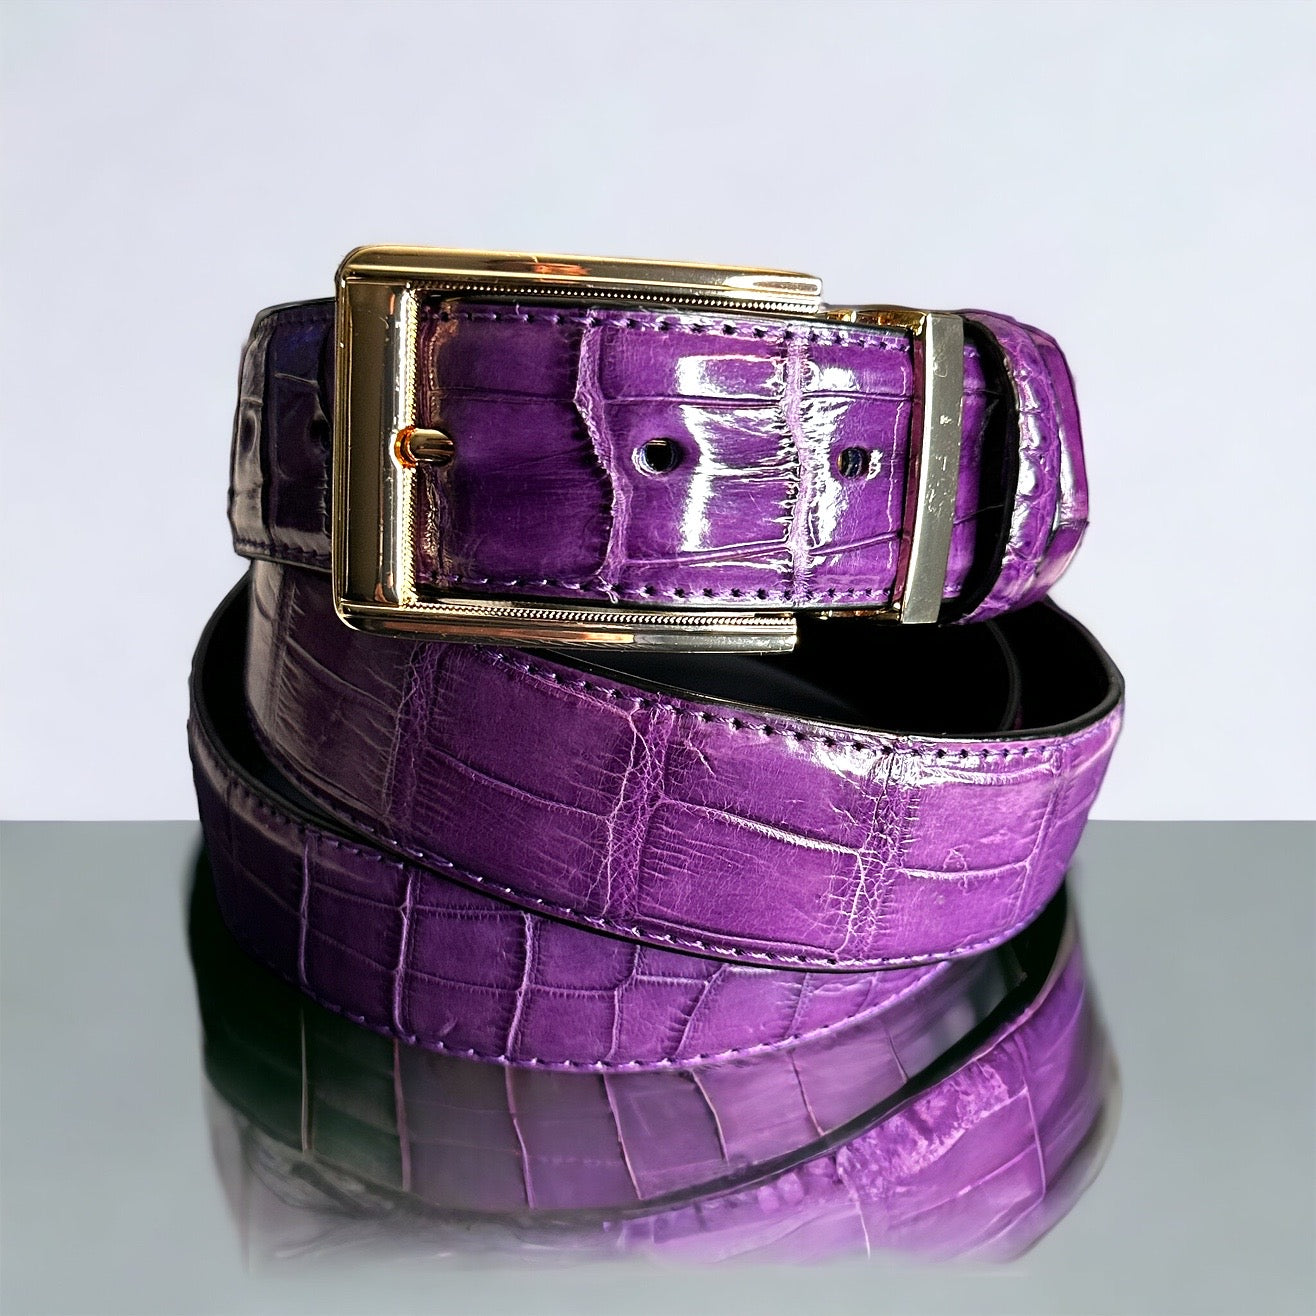 This handmade purple natural skin belt in crocodile serves as the standard for men's belts for suits. What is so great about this type of skin is that it fits with any outfit even jeans. With the supplied gold square and nickel square buckles, you get to choose what look you need for any type of event. Adjustable. 